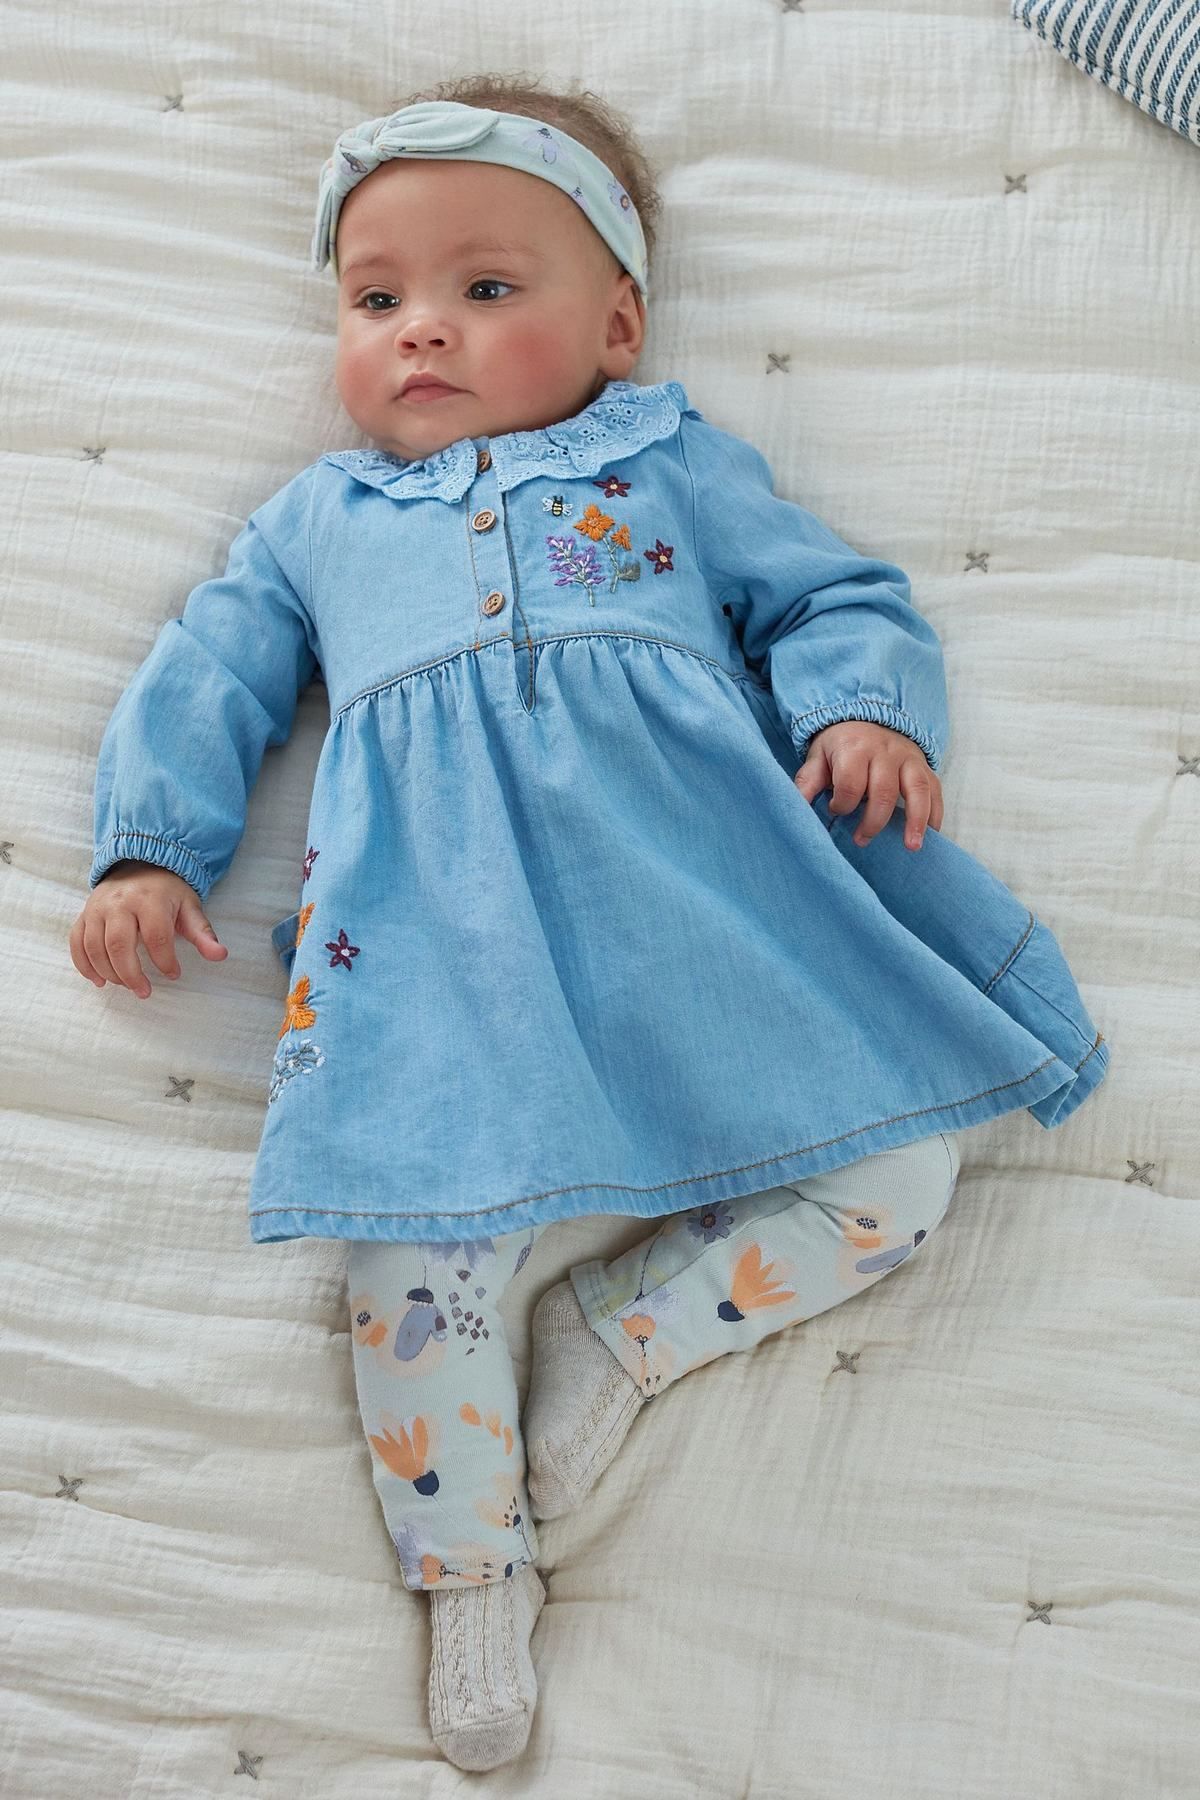 NEXT blue-denim-embroidered-baby-dress-with-floral-print-leggings -and-headband-nxt-t47851-denim Black Girl Sets